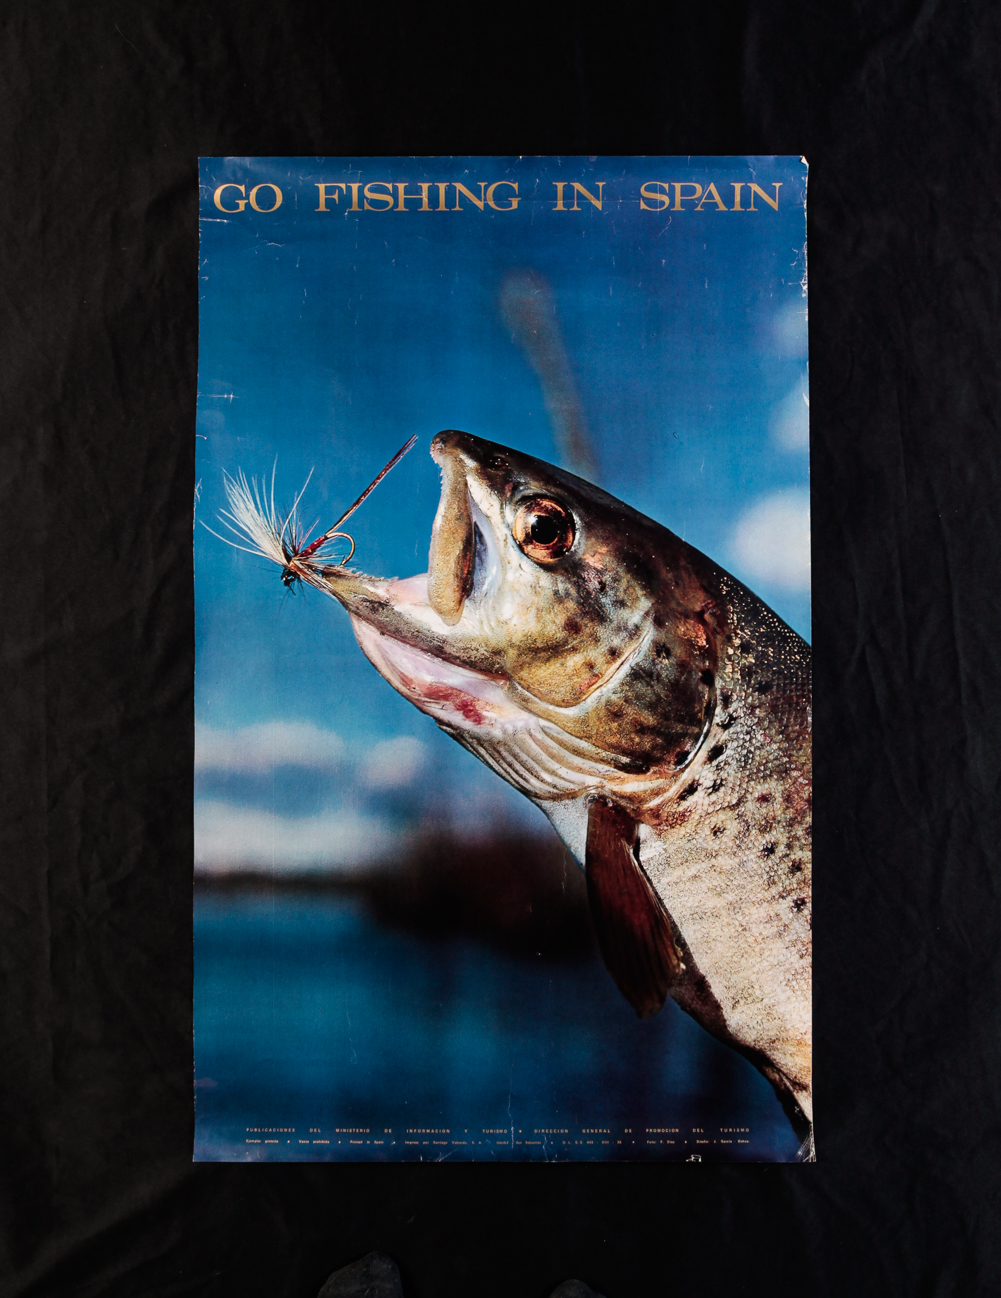 FISHING IN SPAIN TRAVEL POSTER.